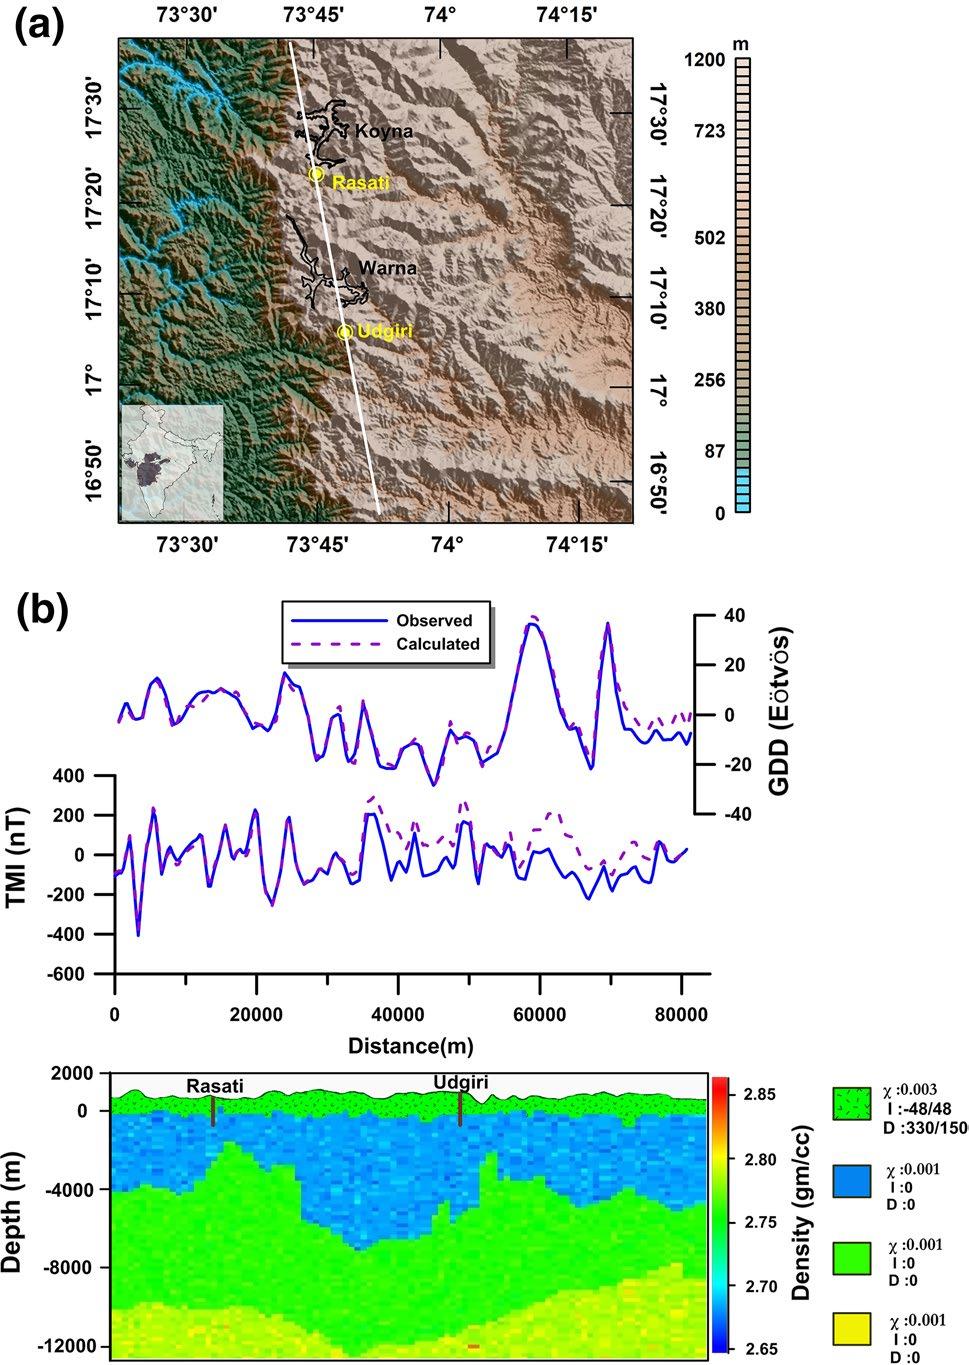 Int J Earth Sci (Geol Rundsch) (2015) 104:1511 1522 inaccessible terrain. These studies indicated a large wavelength gravity low encompassing Koyna Warna earthquake region.